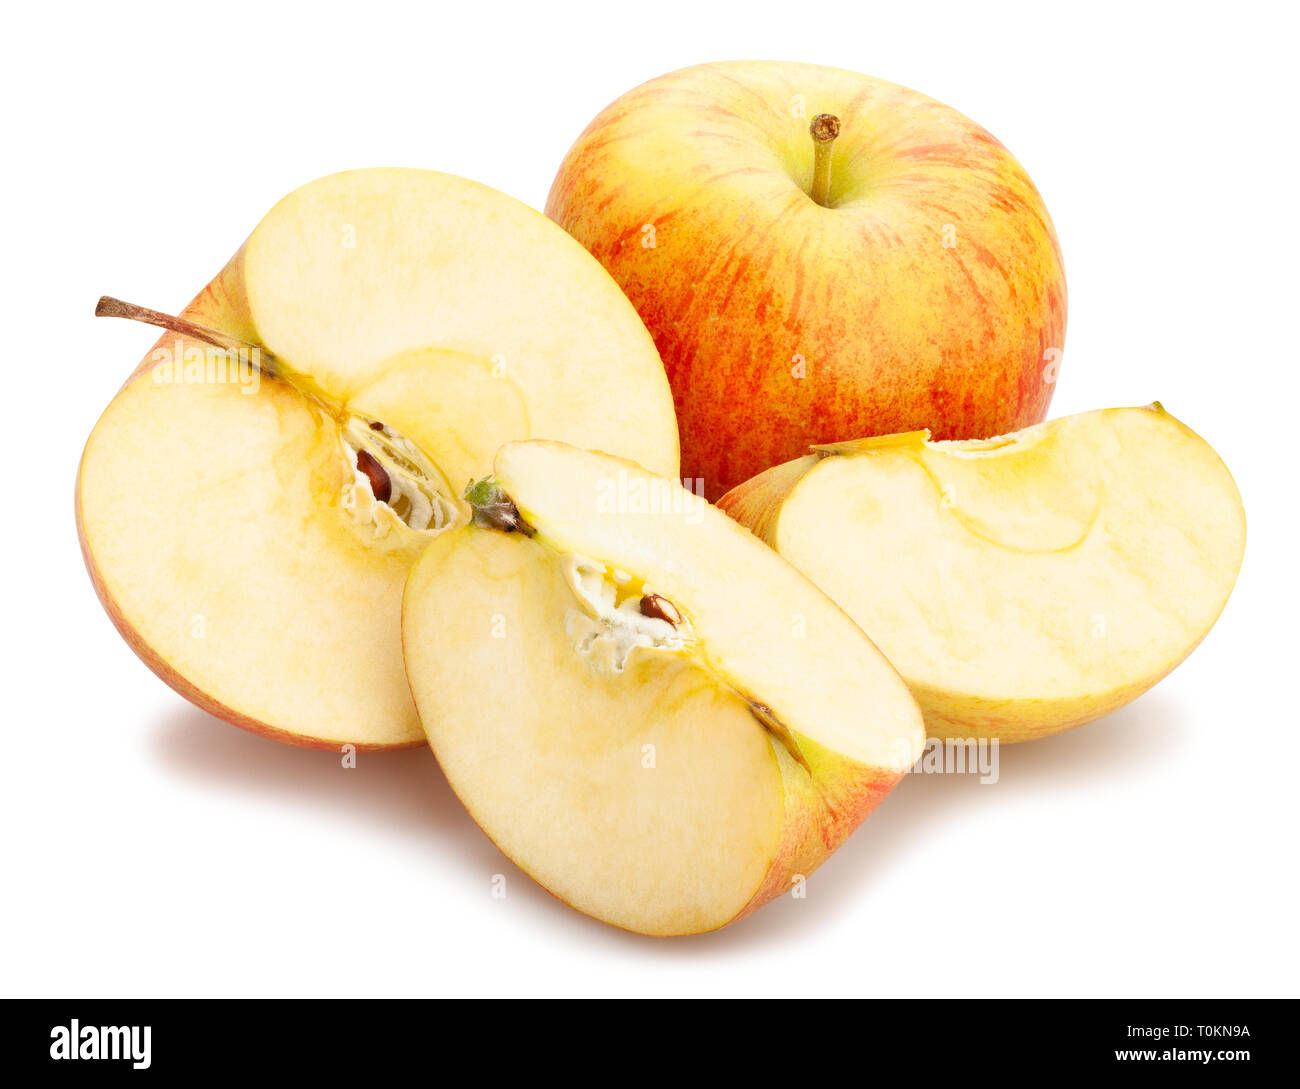 apples path isolated Stock Photo